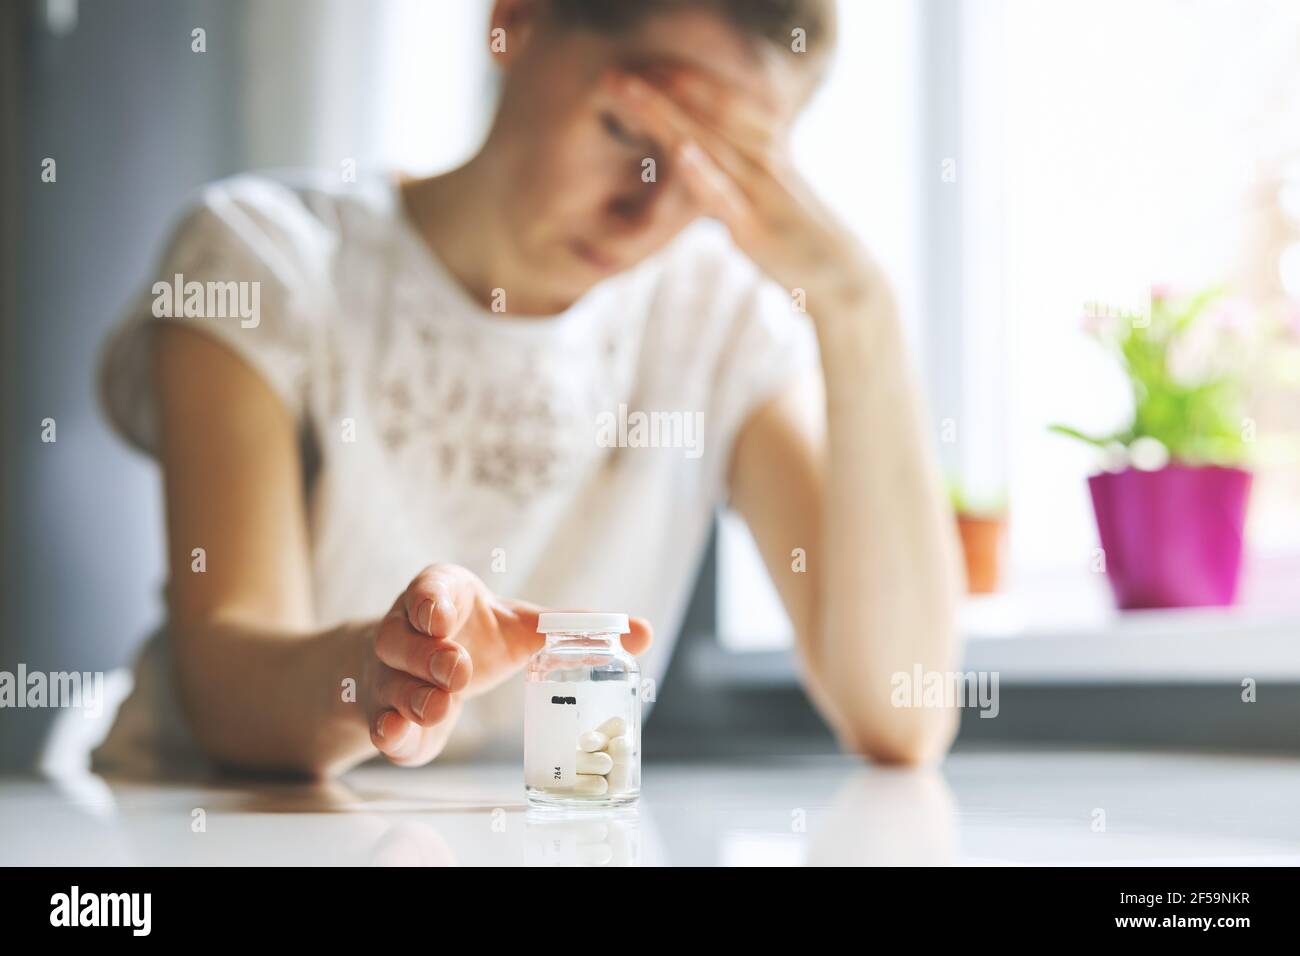 woman with headache reaching for painkiller pills. migraine, cephalalgia and stress concept Stock Photo